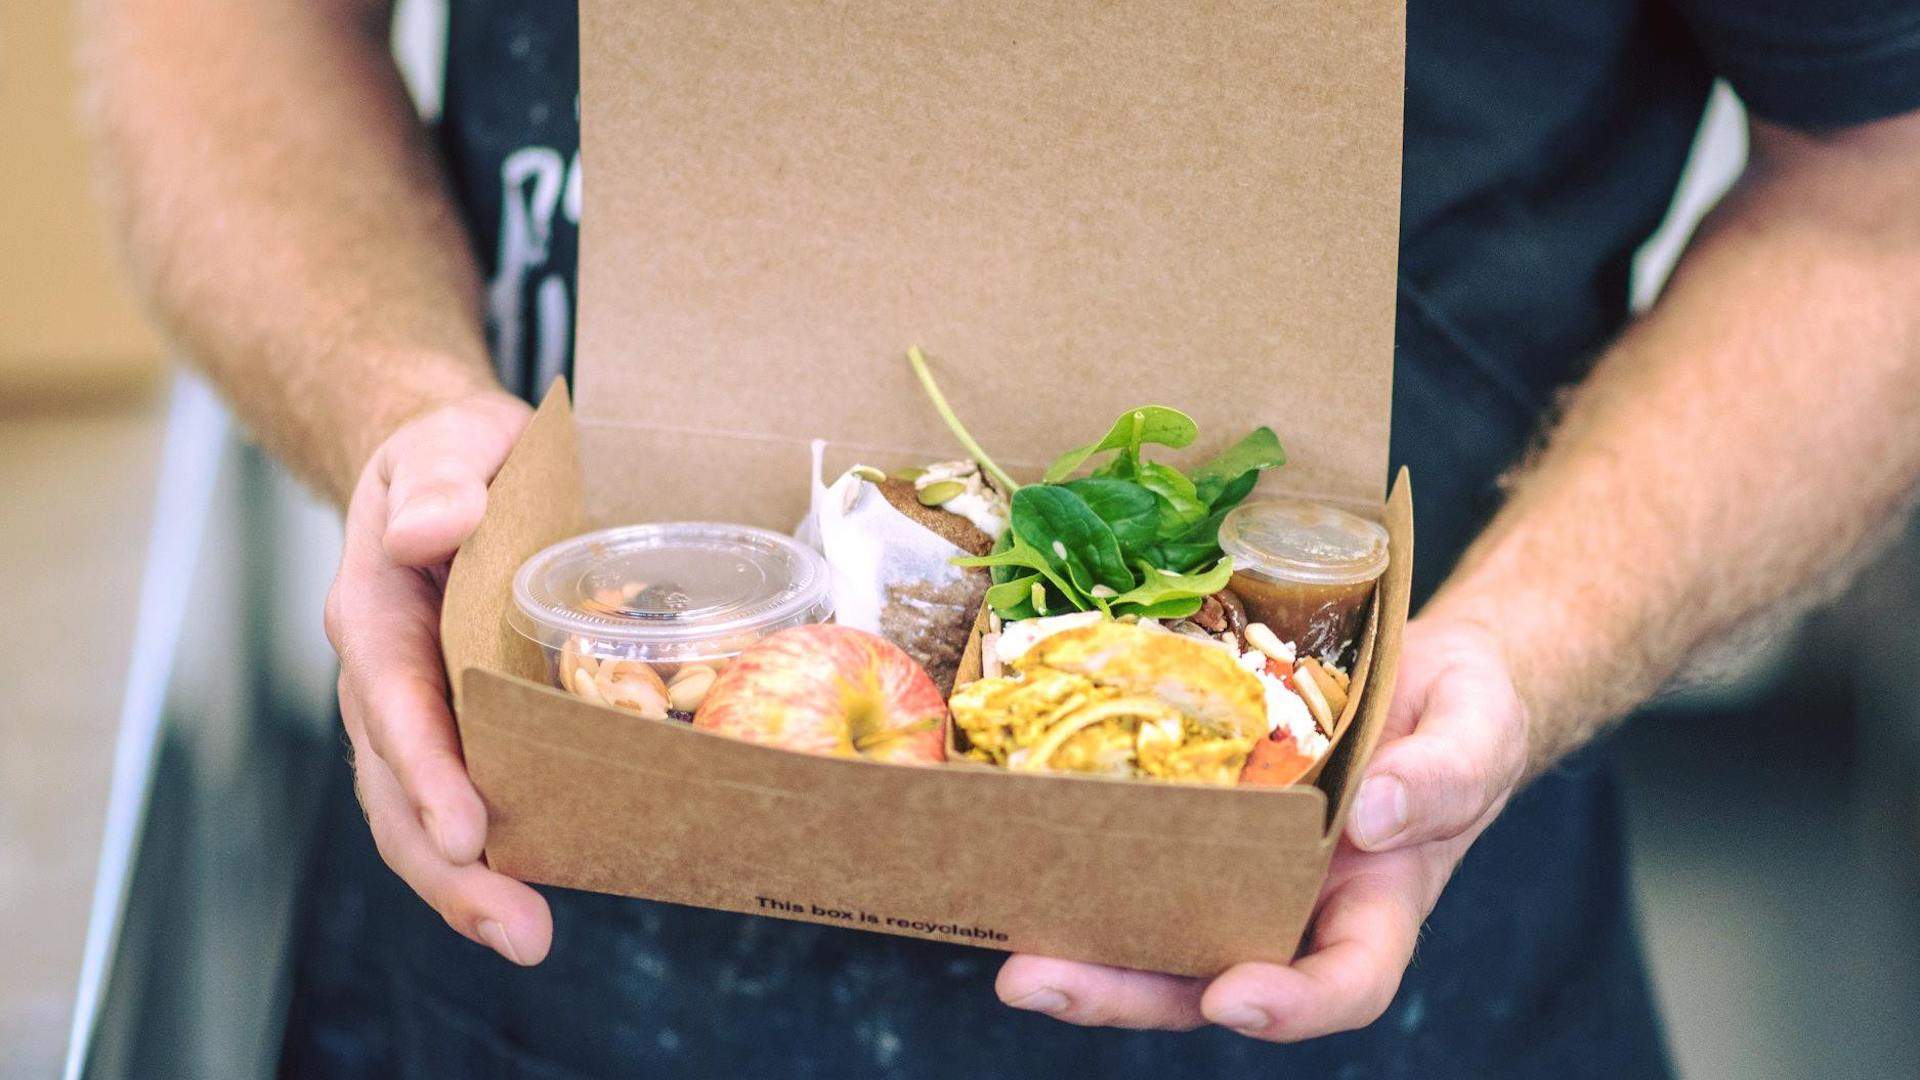 Buy One, Give One Initiative Eat My Lunch Is Opening a Physical Store